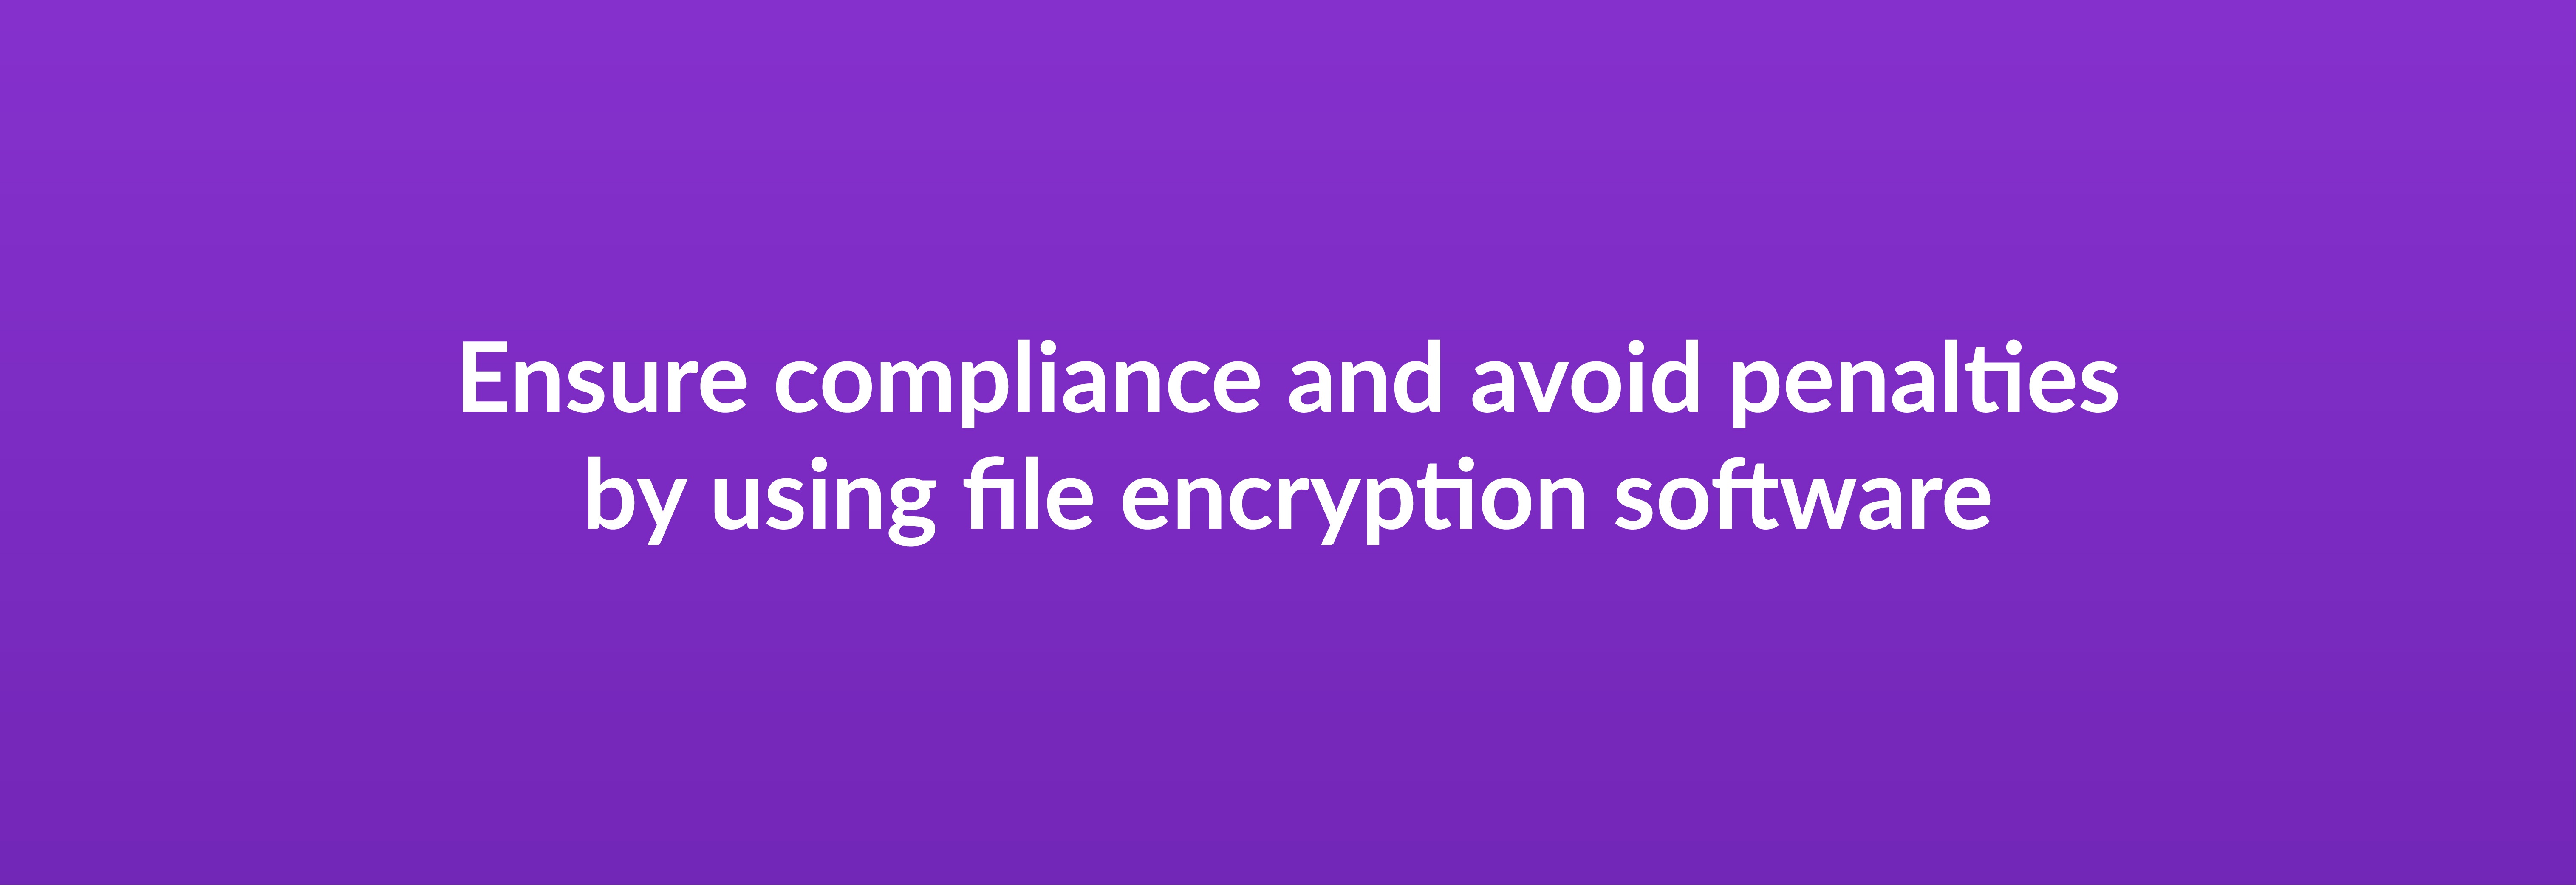 Ensure compliance and avoid penalties by using file encryption software